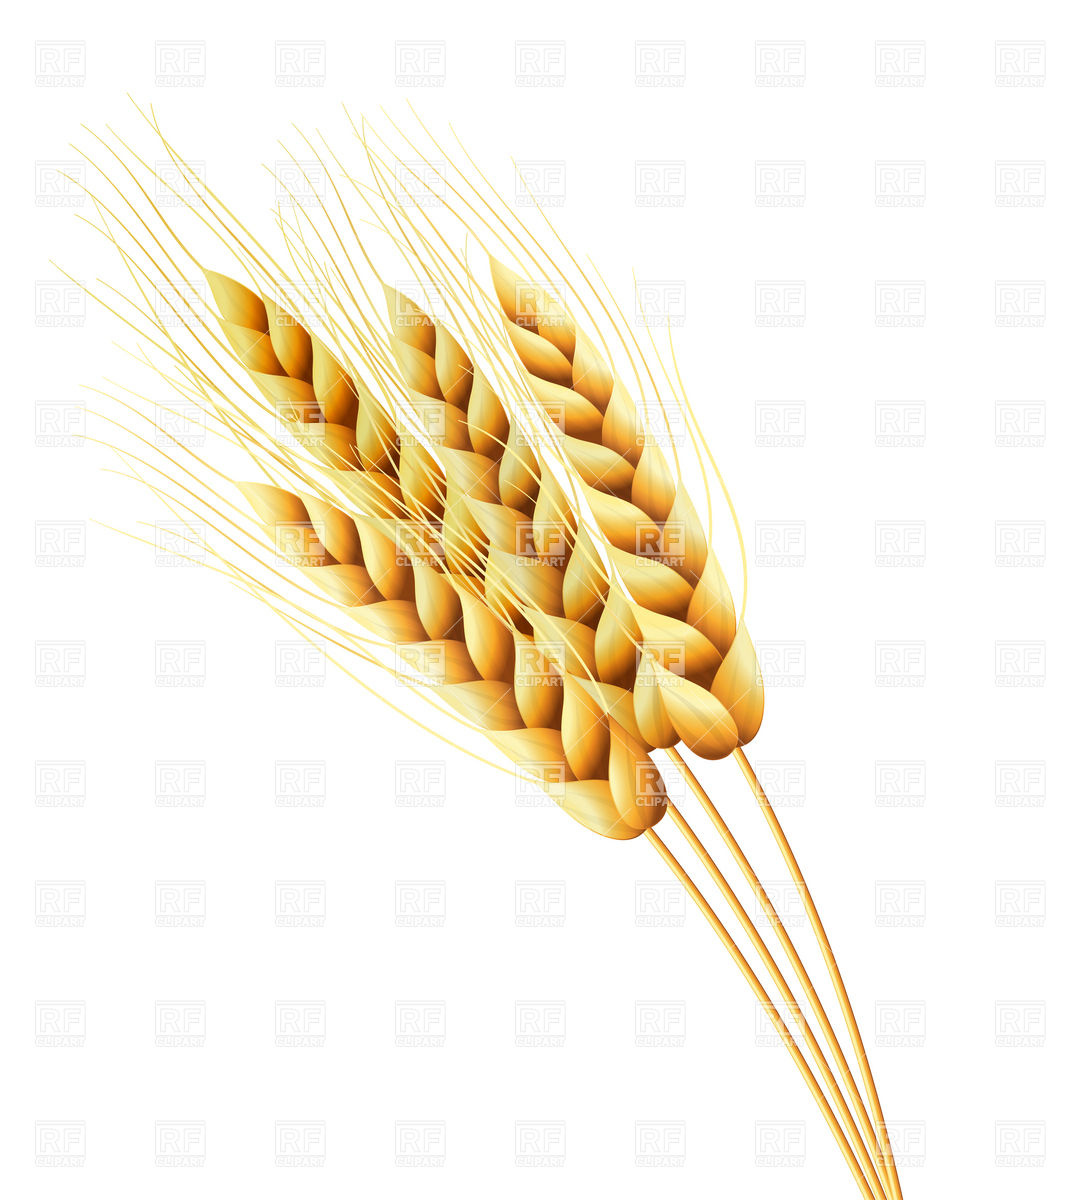 Ears Of Wheat Or Rye Download Royalty Free Vector Clipart Eps